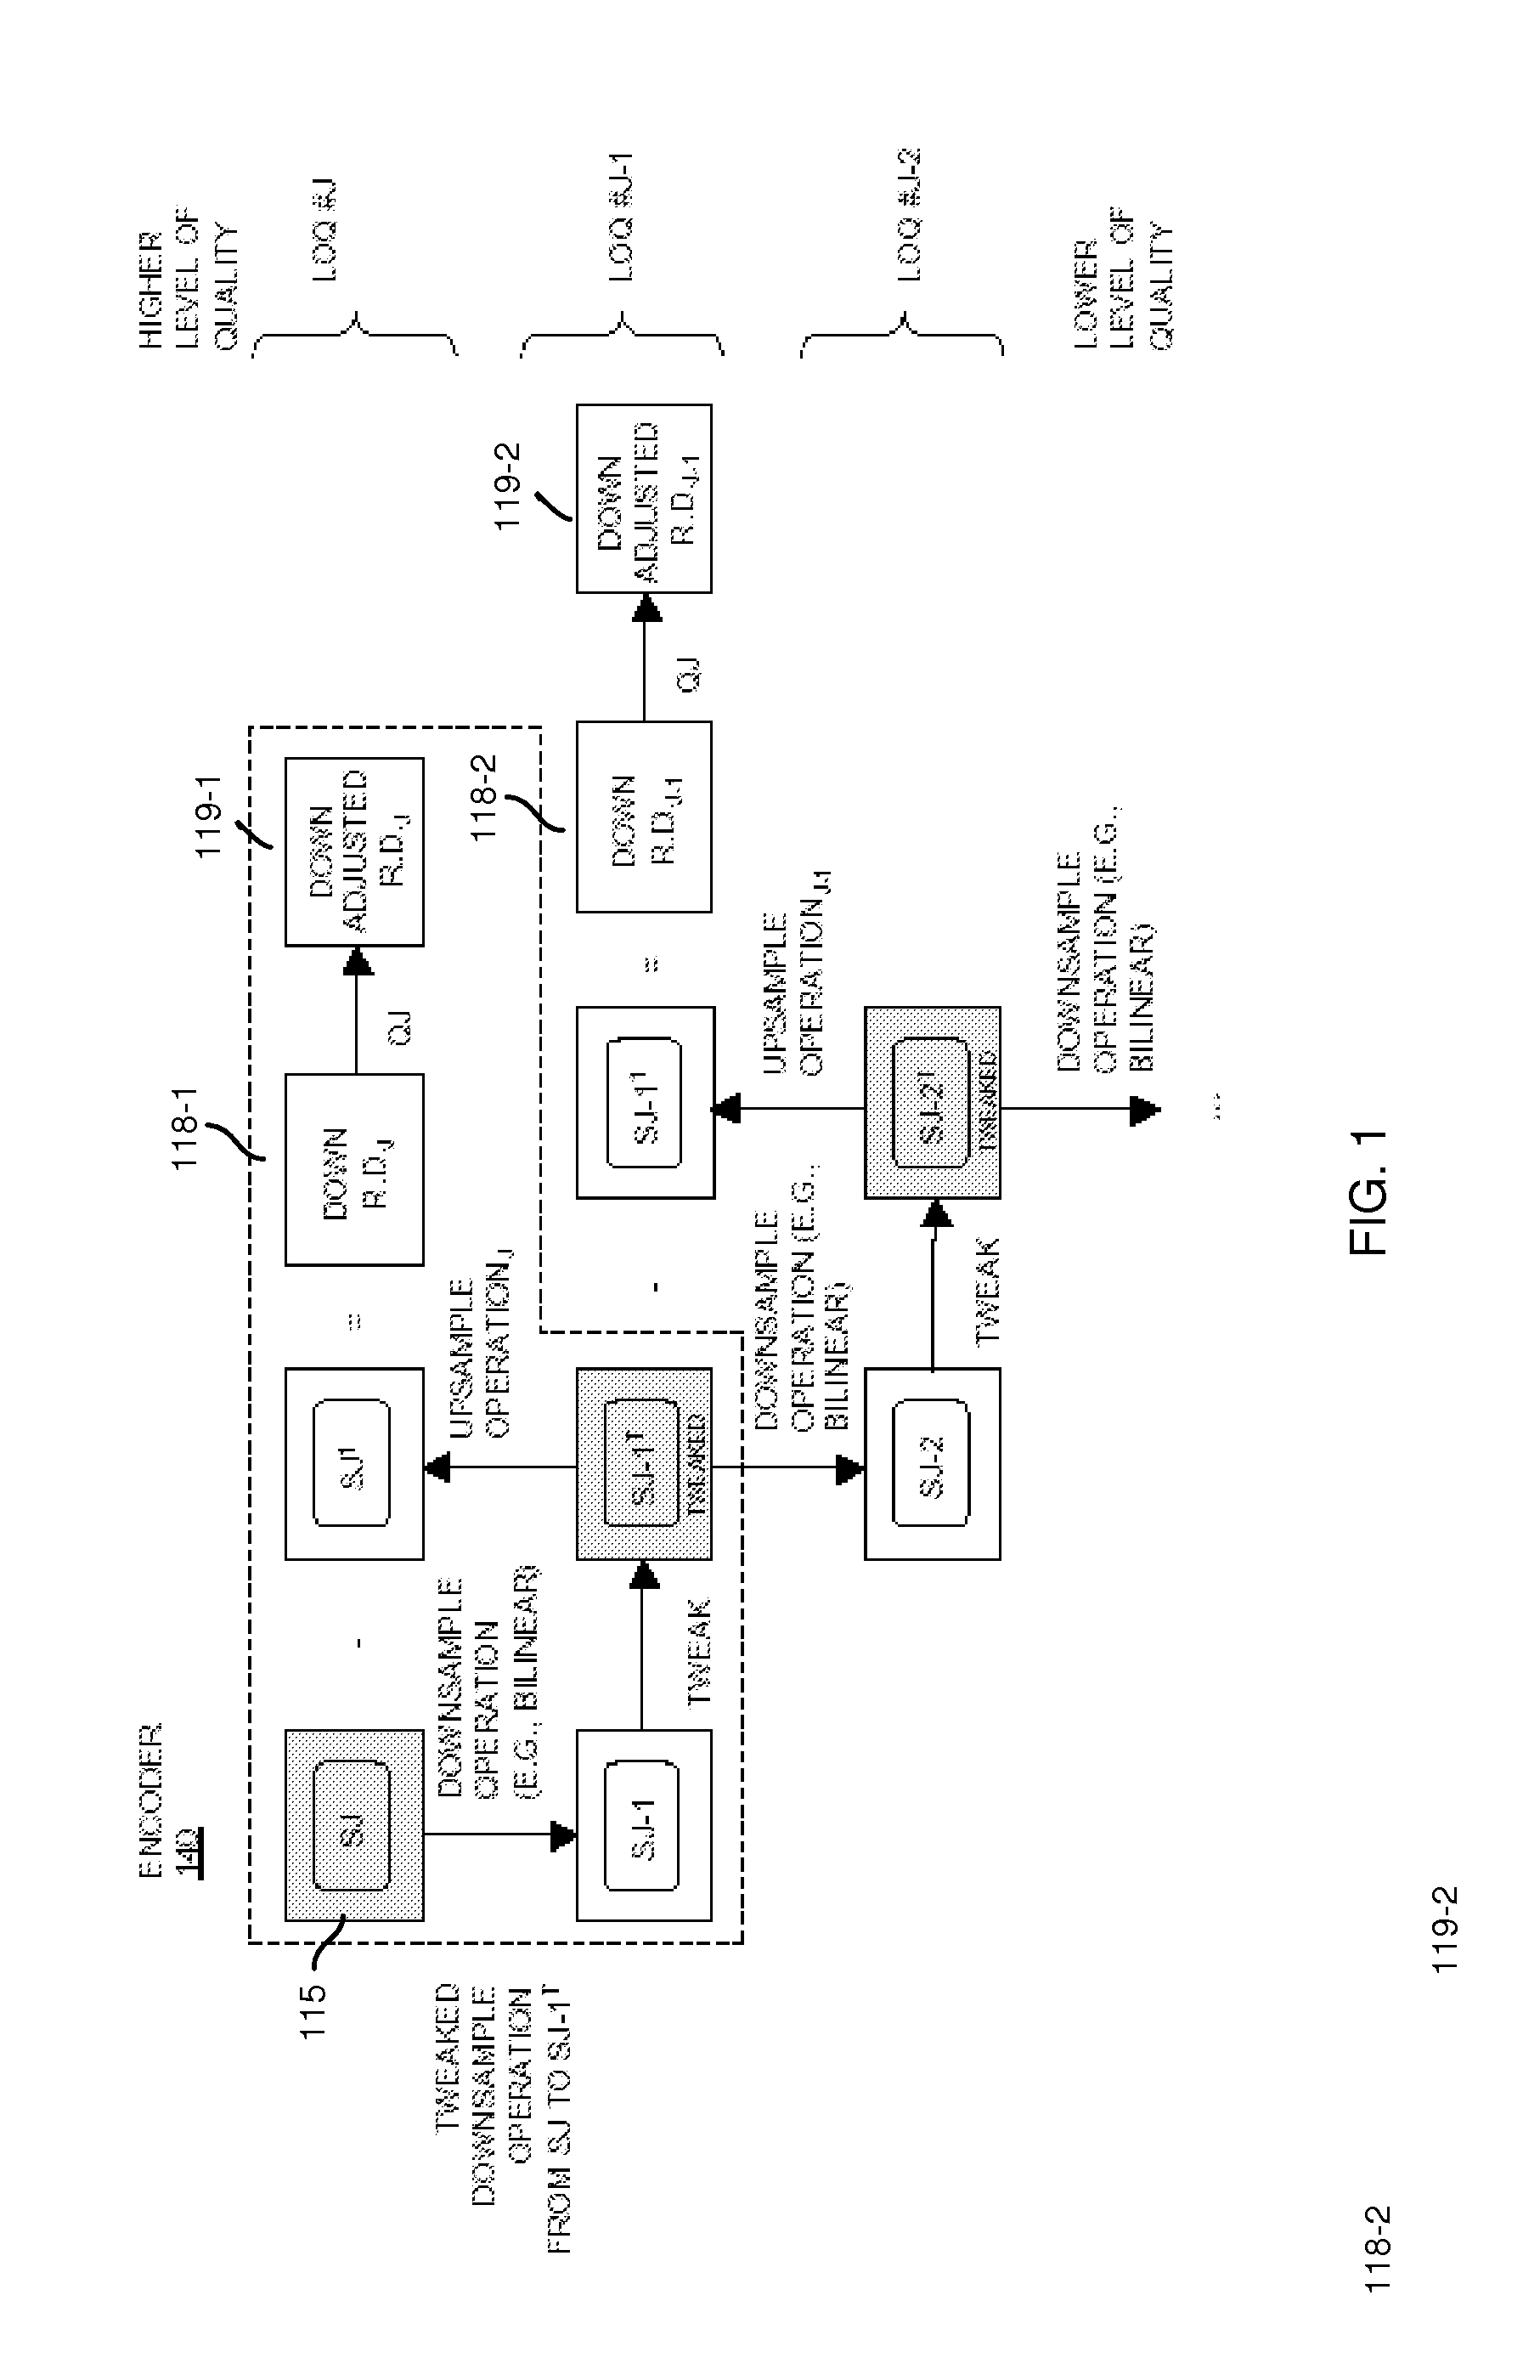 Signal processing and tiered signal encoding